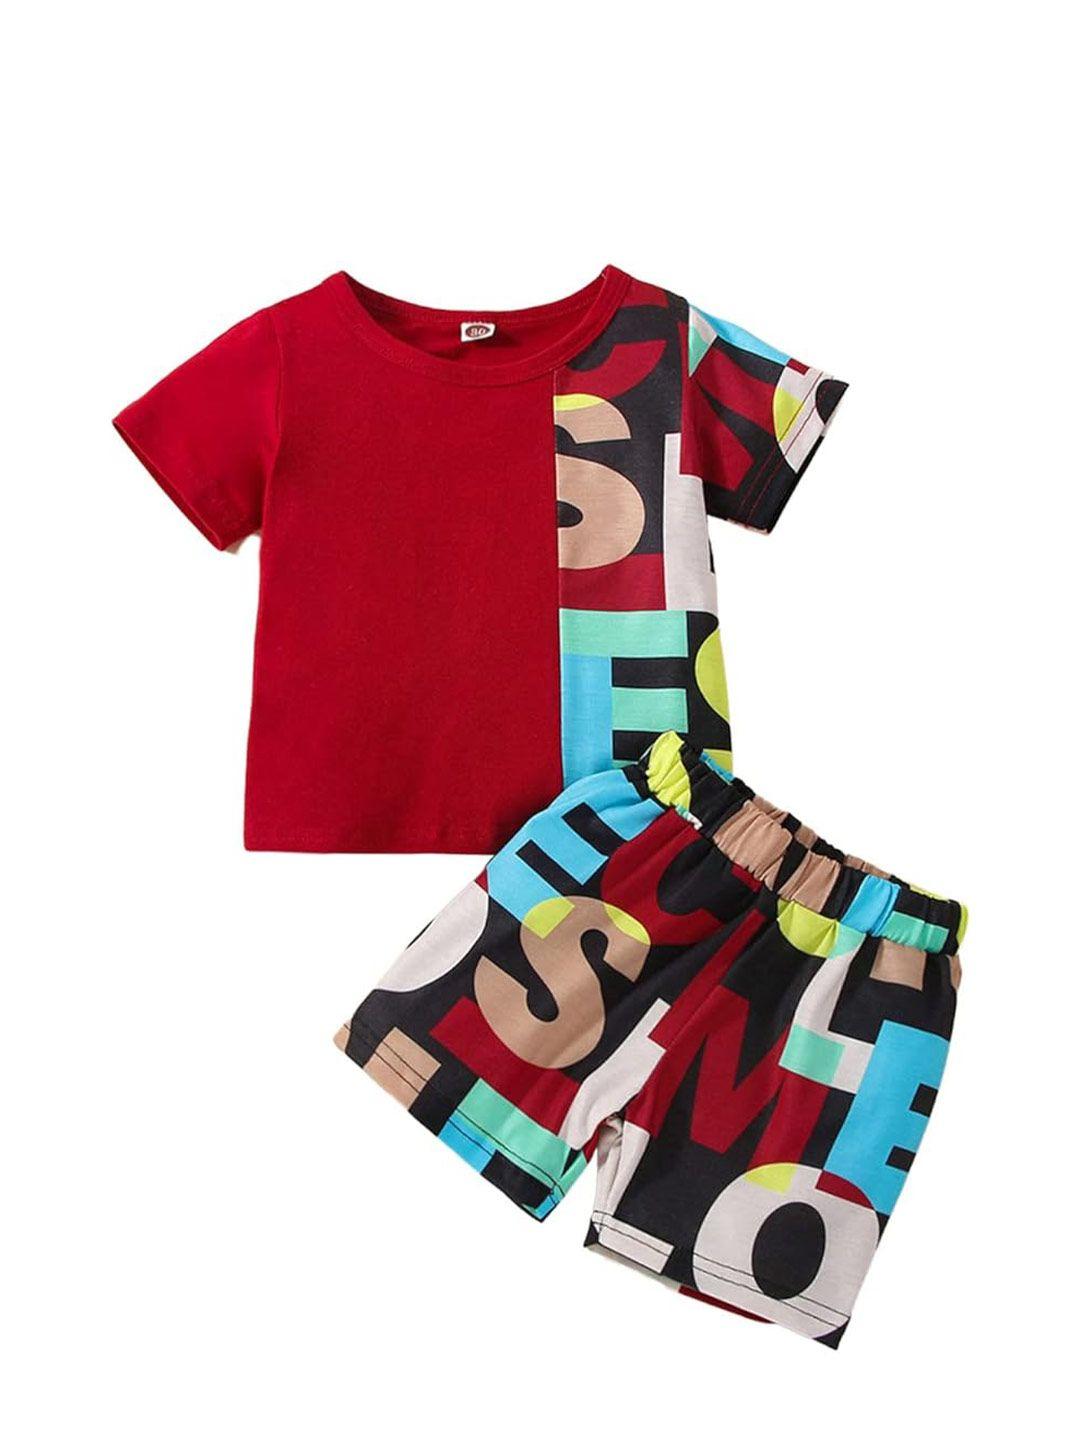 baesd-unisex-kids-red-&-multicoloured-printed-t-shirt-with-shorts